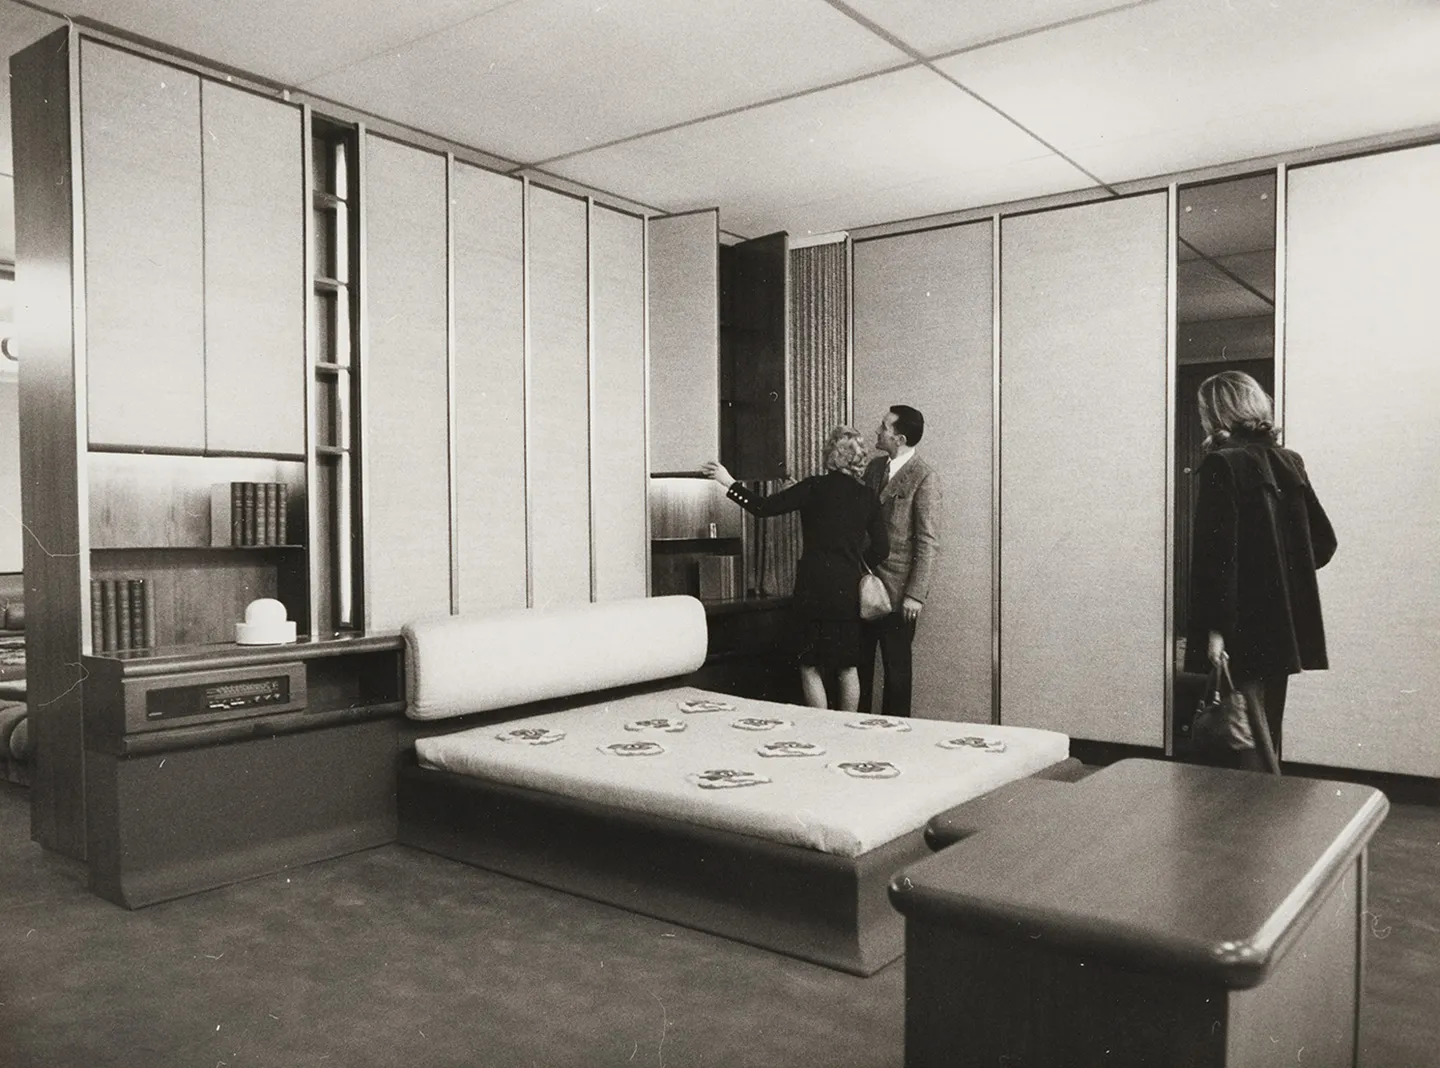 Bedrooms furnished with functional built-in wardrobes in the furniture pavilion at the Milan Trade Fair in 1974